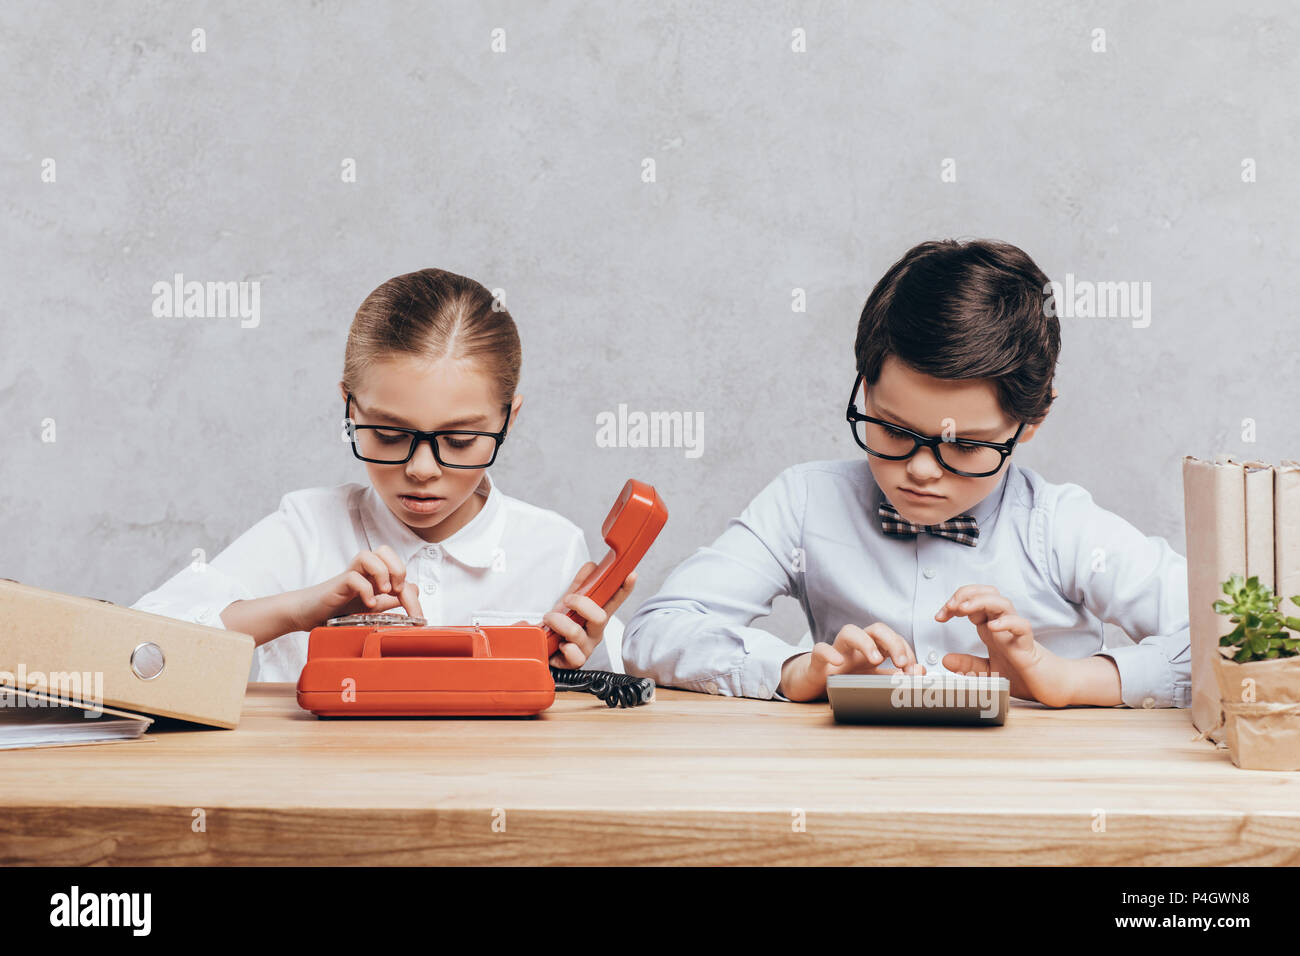 portrait of concentrated children in eyeglasses working together at workplace Stock Photo